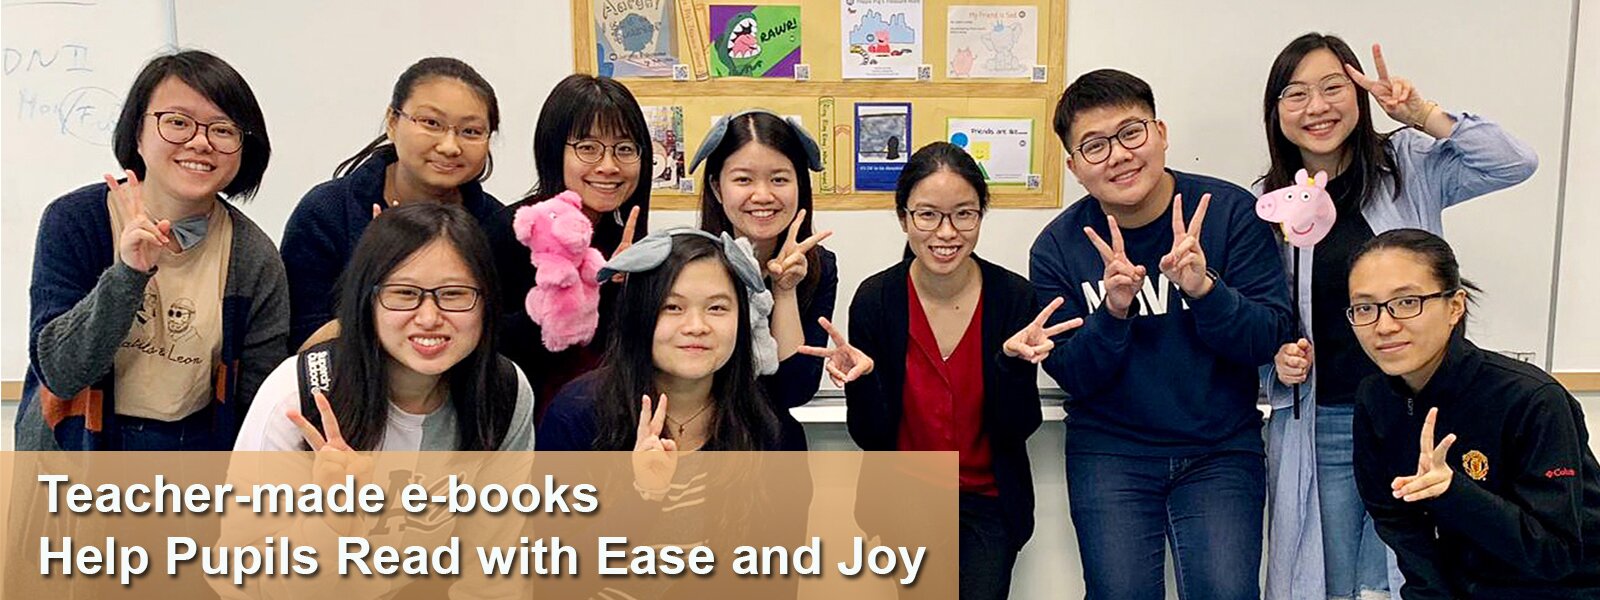 Teacher-made e-books Help Pupils Read with Ease and Joy